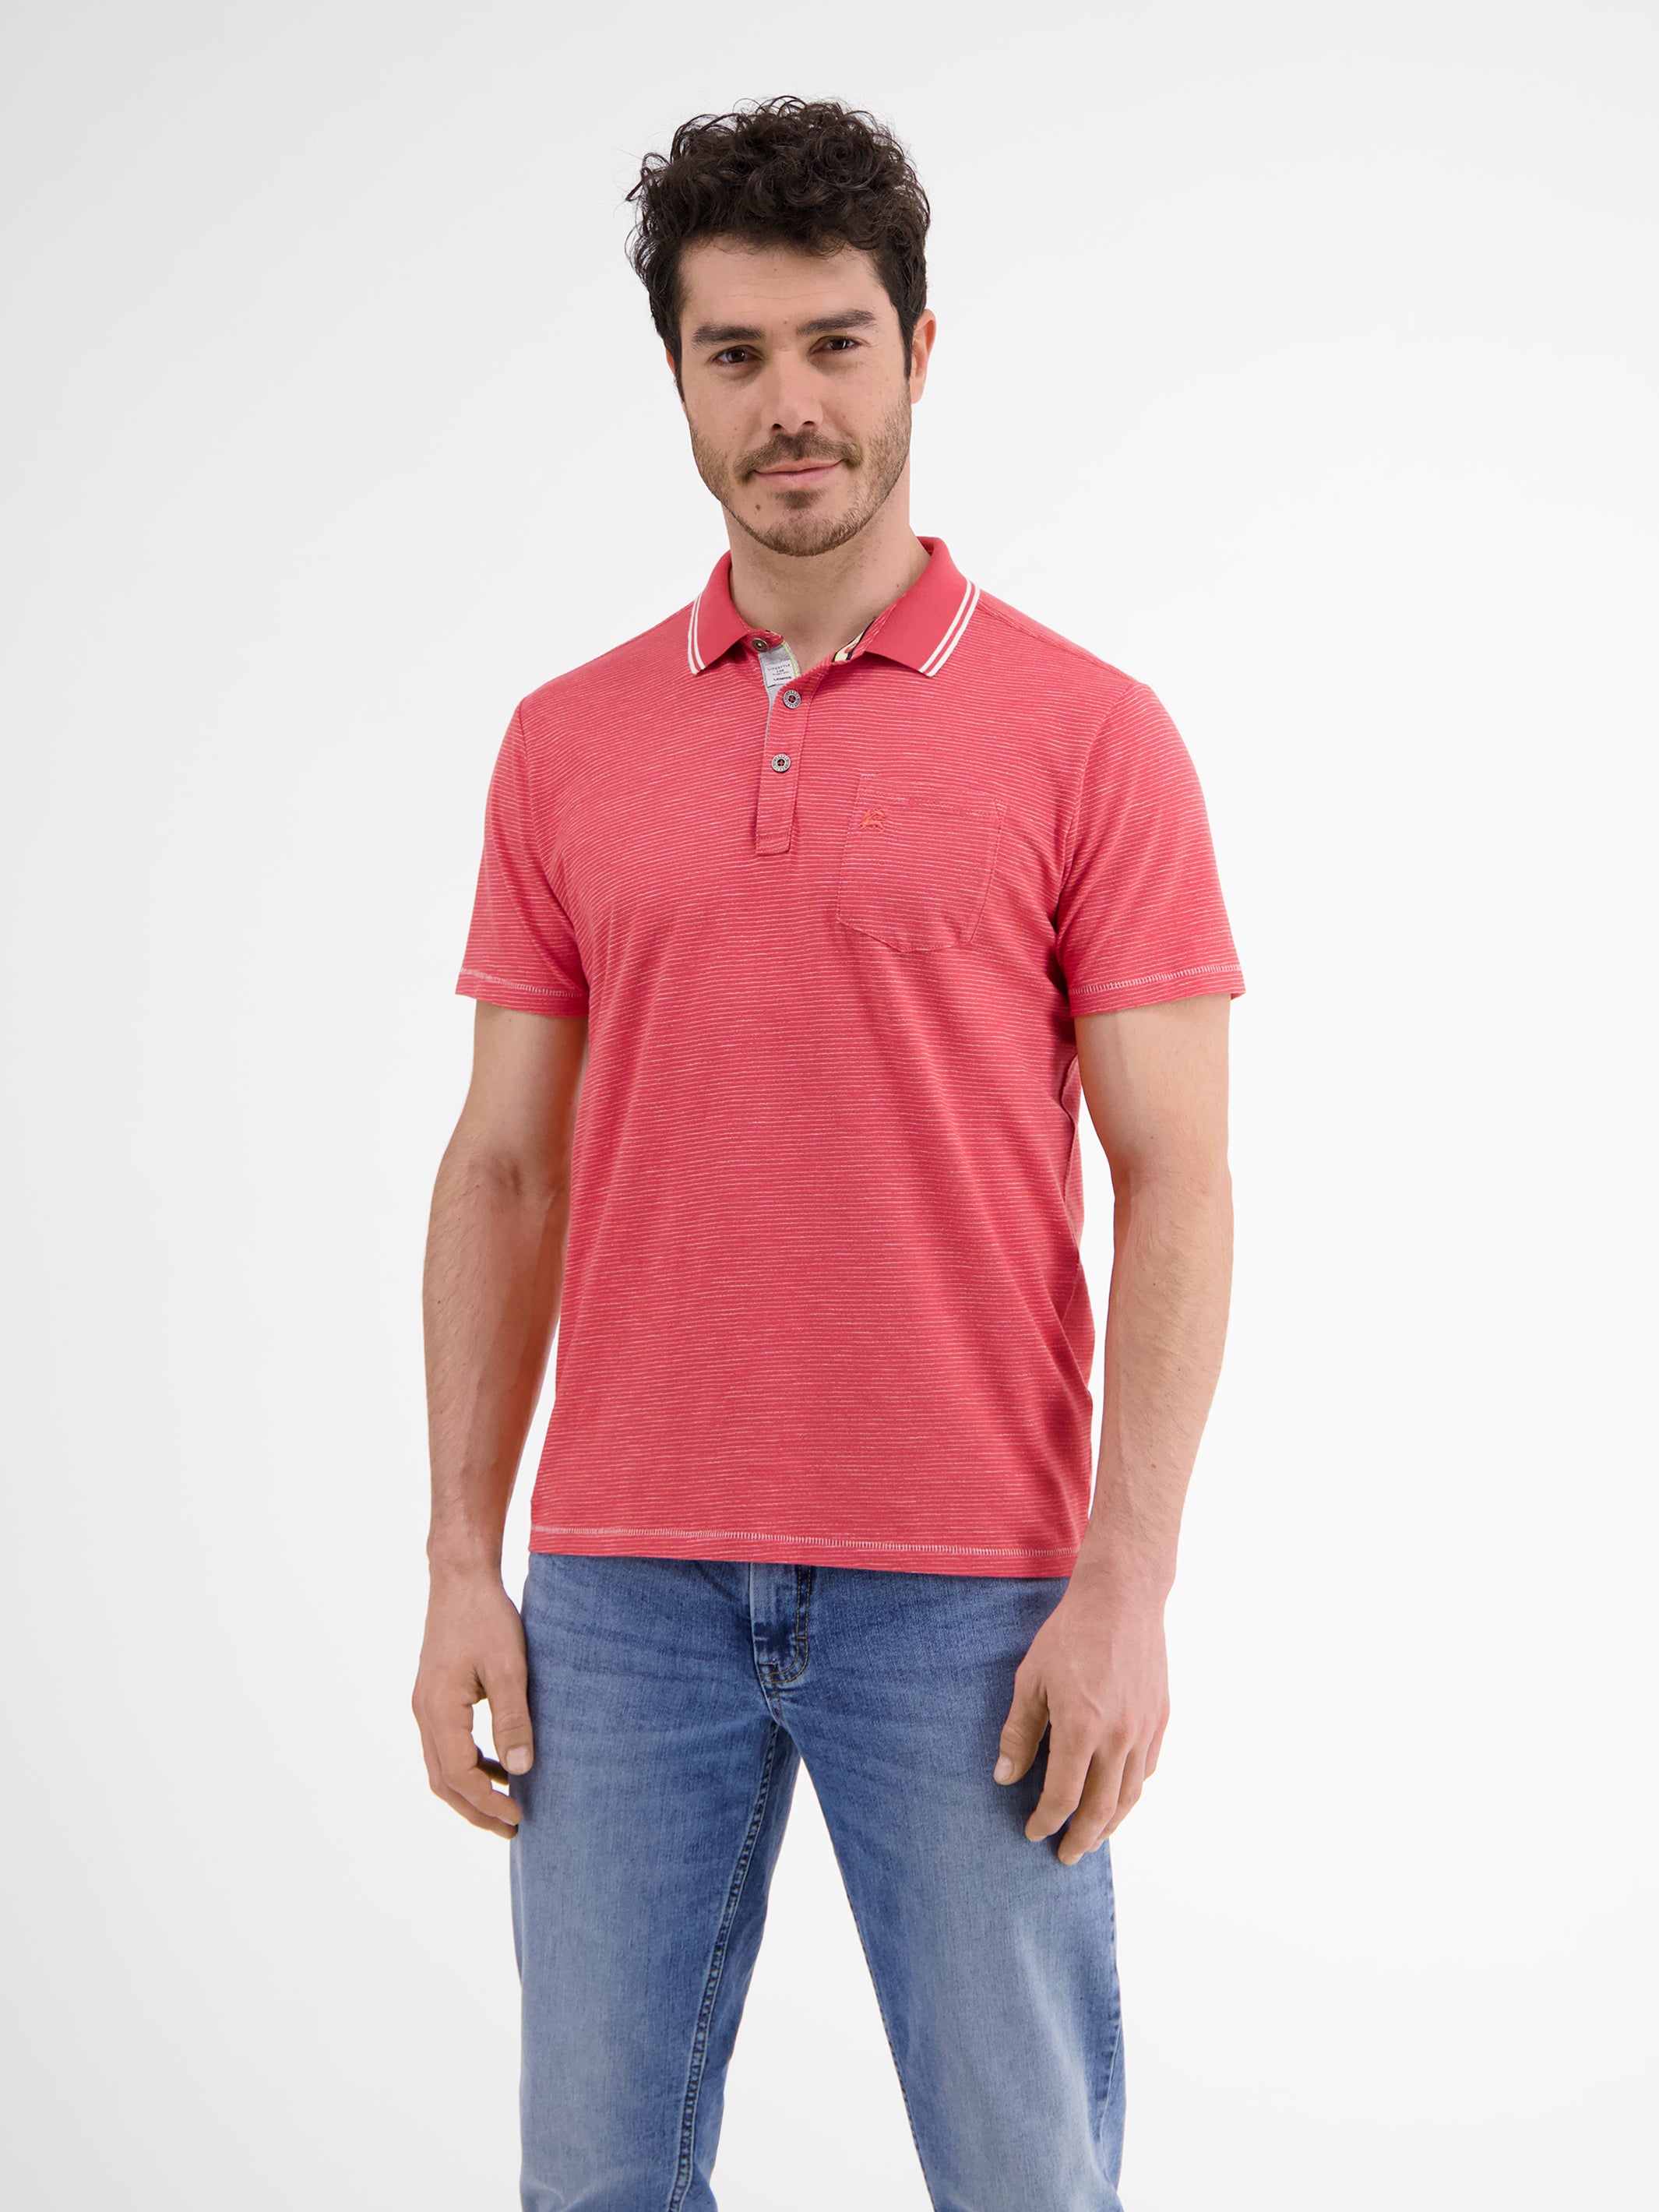 SHOP with shirt stripes – LERROS Polo fineliner